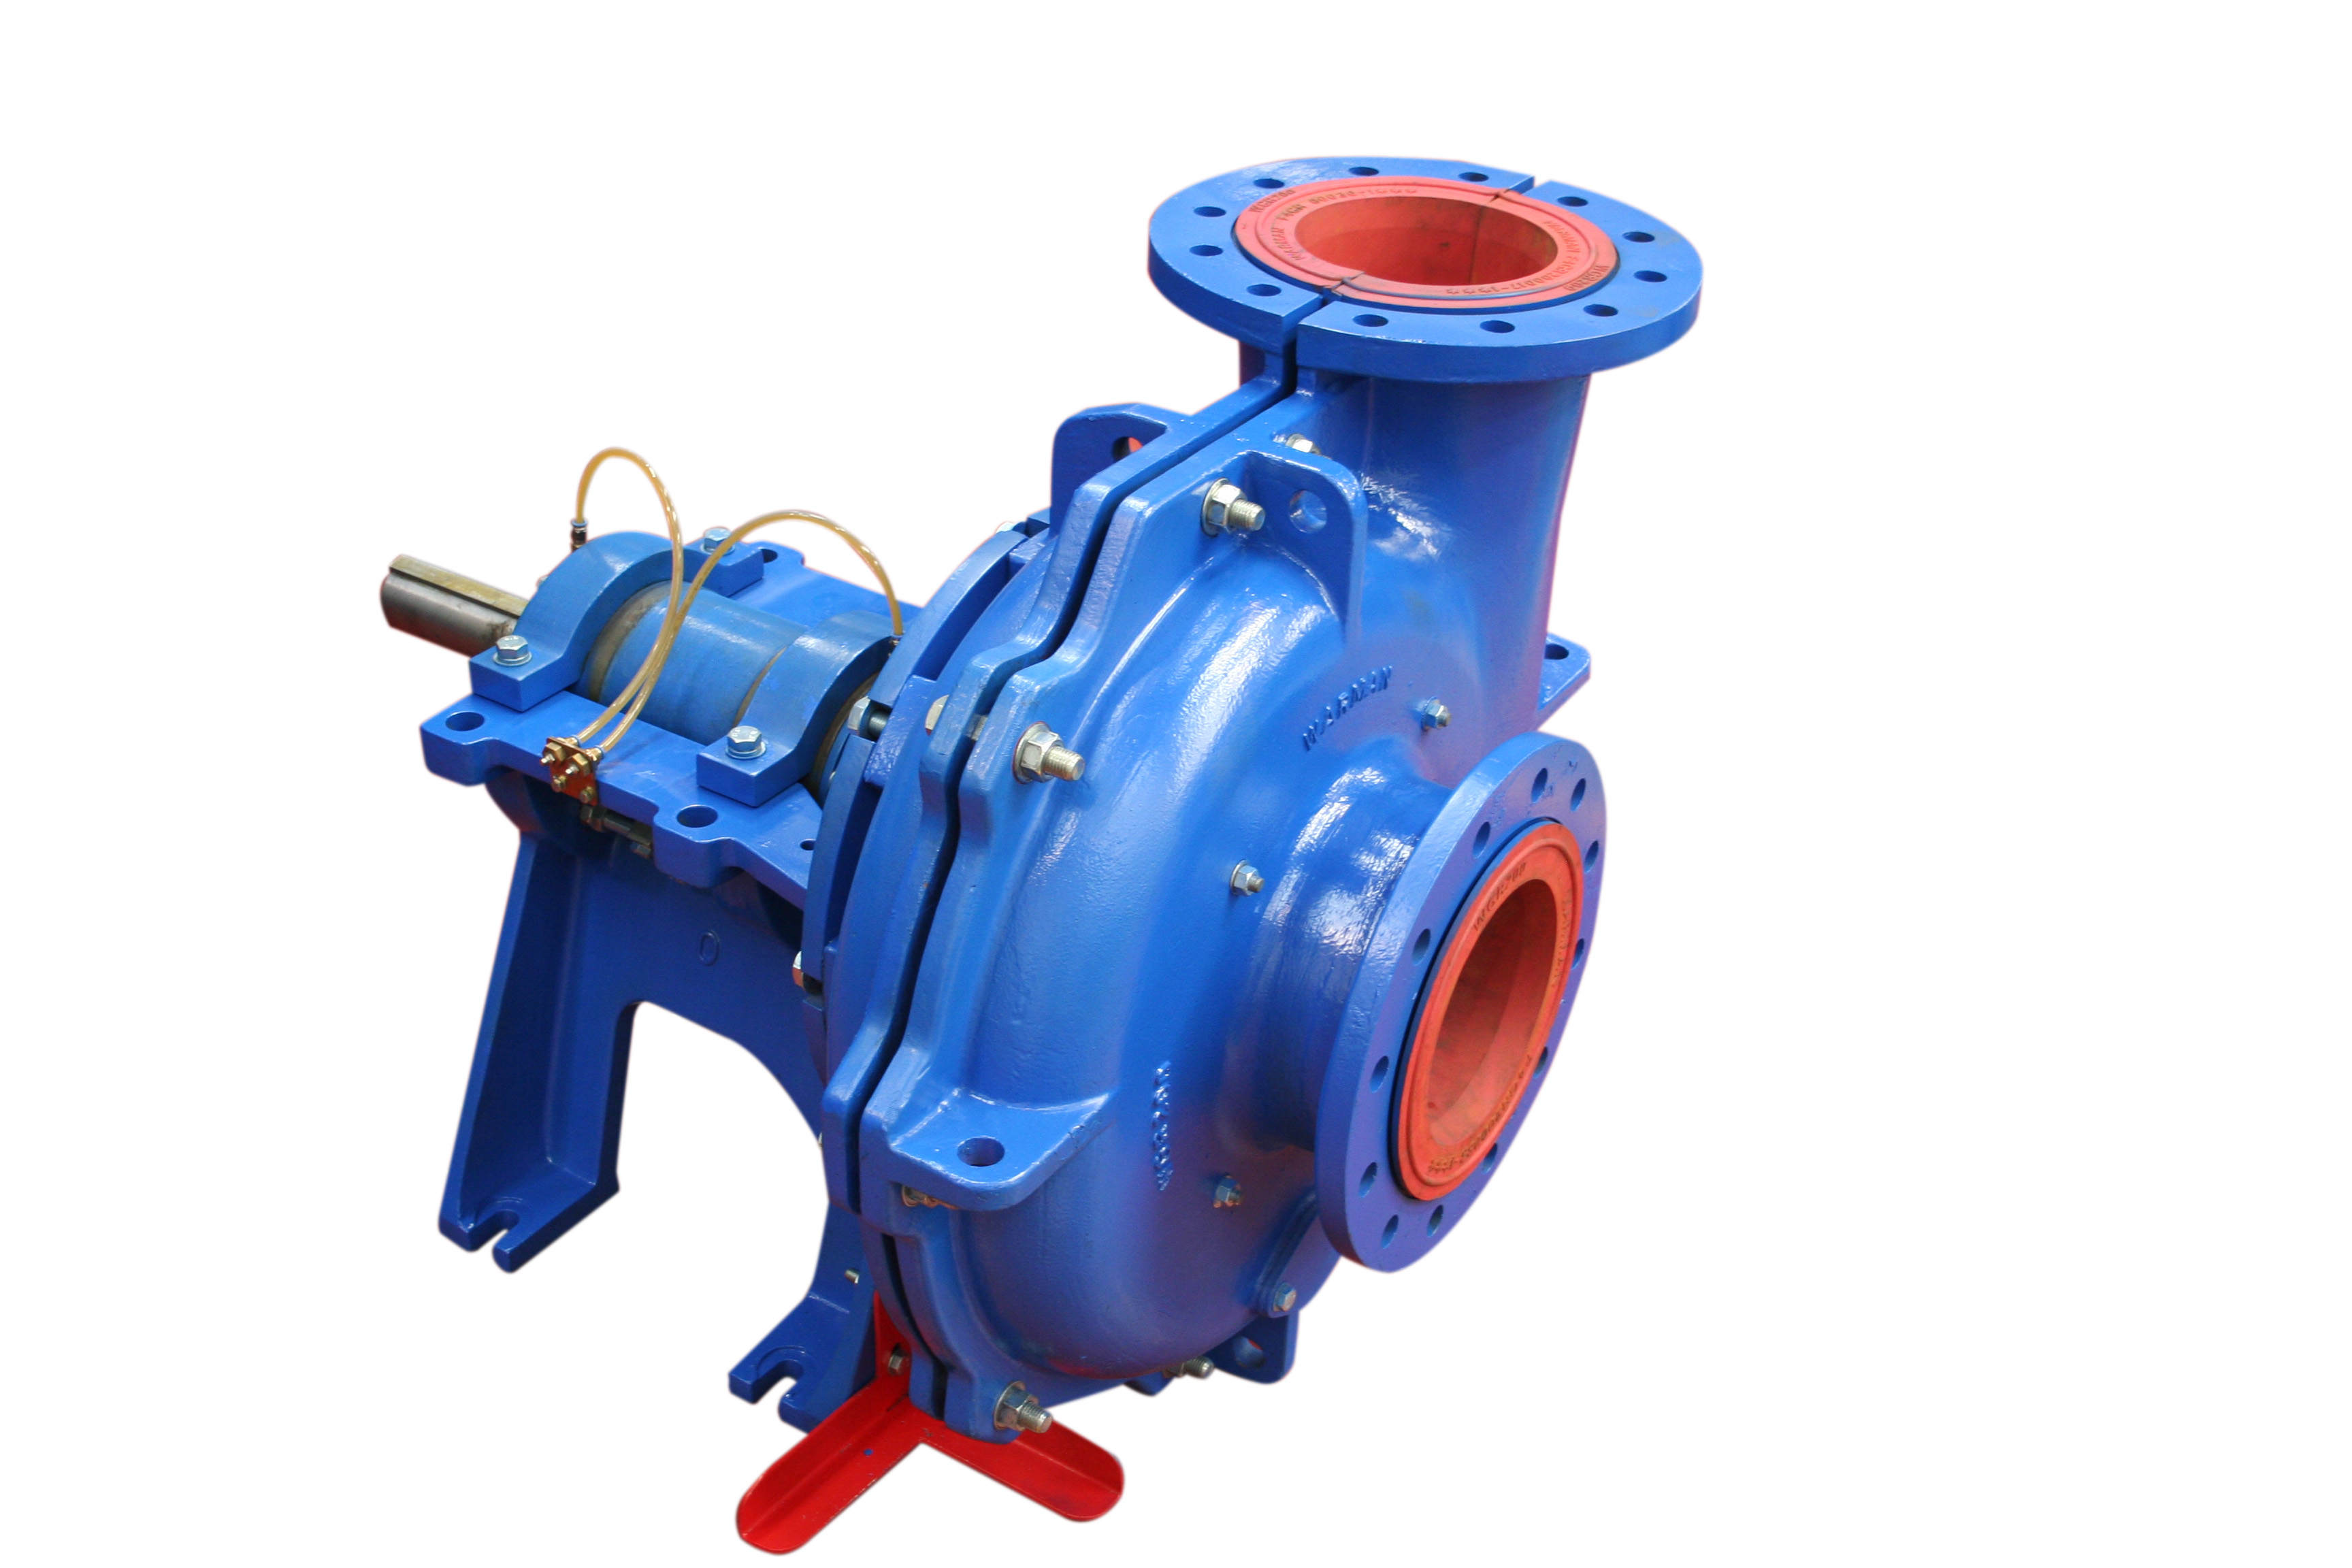 The Warman WGR 2nd generation pump has wear components that were created using the latest technology.